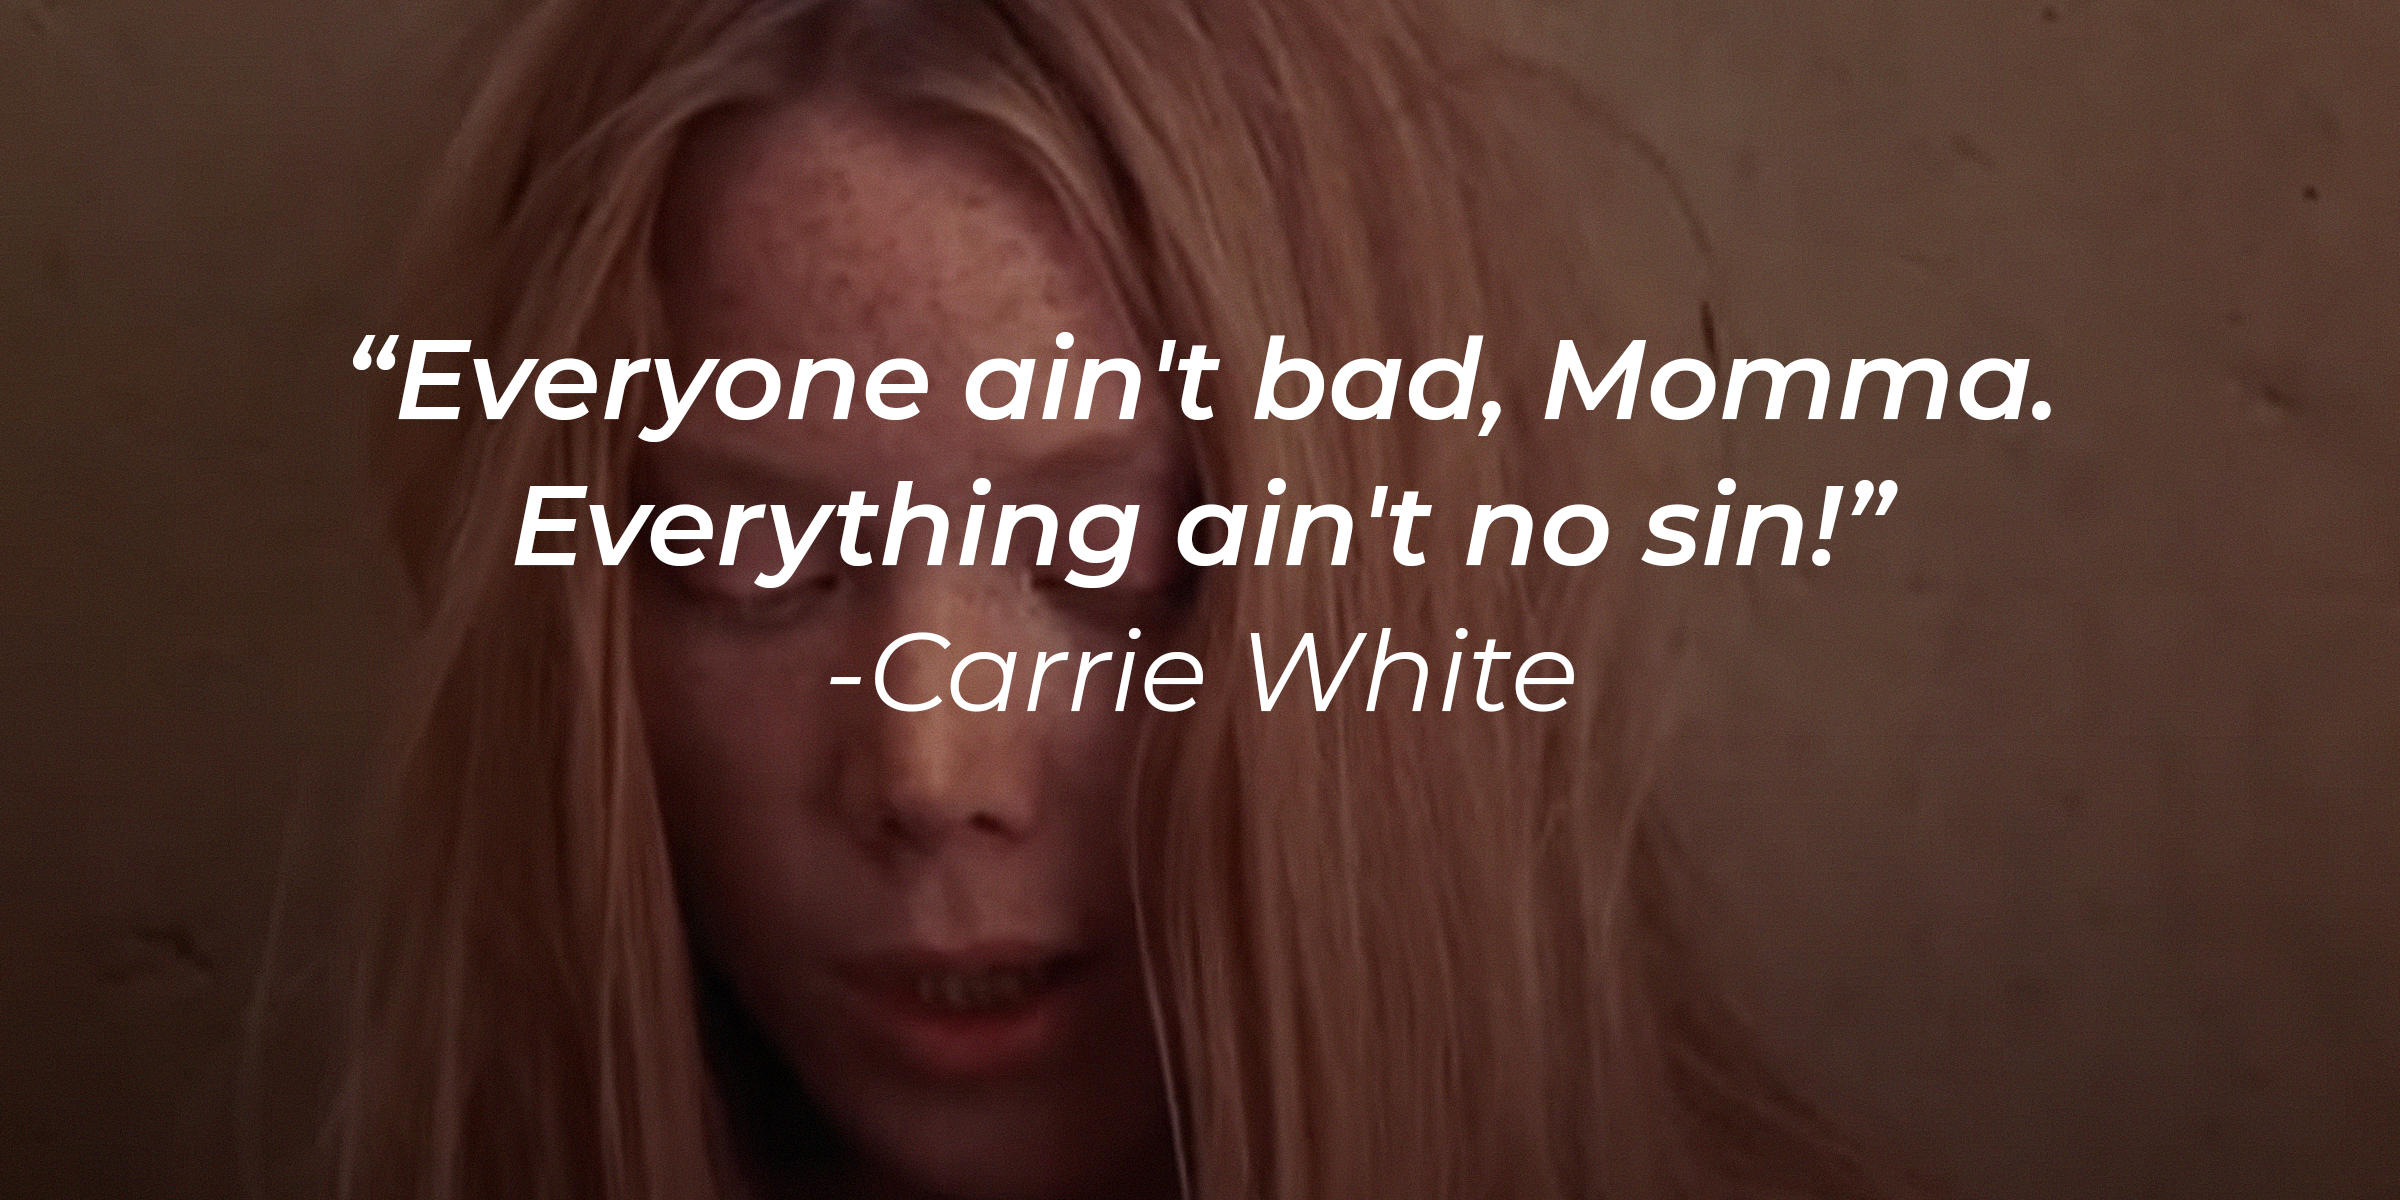 A photo of Carrie White with Carrie White's quote: "Everyone ain't bad, Momma. Everything ain't no sin!" | Source: youtube.com/MGMStudios